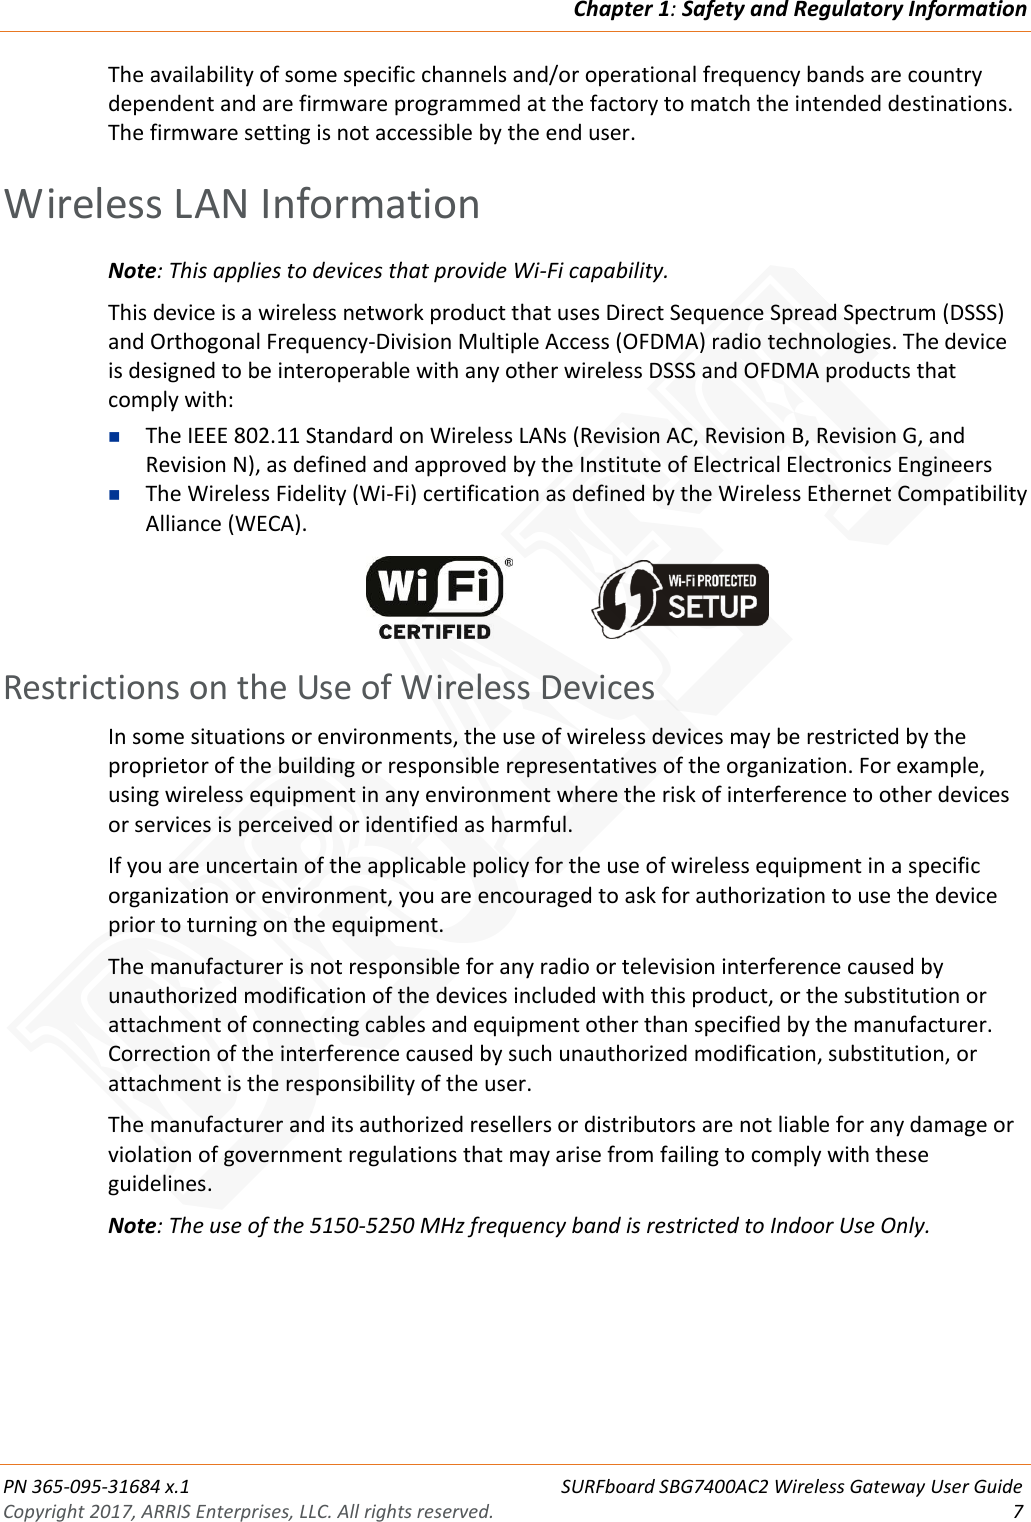 Chapter 1: Safety and Regulatory Information  PN 365-095-31684 x.1 SURFboard SBG7400AC2 Wireless Gateway User Guide Copyright 2017, ARRIS Enterprises, LLC. All rights reserved.  7  The availability of some specific channels and/or operational frequency bands are country dependent and are firmware programmed at the factory to match the intended destinations. The firmware setting is not accessible by the end user.   Wireless LAN Information Note: This applies to devices that provide Wi-Fi capability. This device is a wireless network product that uses Direct Sequence Spread Spectrum (DSSS) and Orthogonal Frequency-Division Multiple Access (OFDMA) radio technologies. The device is designed to be interoperable with any other wireless DSSS and OFDMA products that comply with:  The IEEE 802.11 Standard on Wireless LANs (Revision AC, Revision B, Revision G, and Revision N), as defined and approved by the Institute of Electrical Electronics Engineers  The Wireless Fidelity (Wi-Fi) certification as defined by the Wireless Ethernet Compatibility Alliance (WECA).      Restrictions on the Use of Wireless Devices In some situations or environments, the use of wireless devices may be restricted by the proprietor of the building or responsible representatives of the organization. For example, using wireless equipment in any environment where the risk of interference to other devices or services is perceived or identified as harmful.  If you are uncertain of the applicable policy for the use of wireless equipment in a specific organization or environment, you are encouraged to ask for authorization to use the device prior to turning on the equipment.  The manufacturer is not responsible for any radio or television interference caused by unauthorized modification of the devices included with this product, or the substitution or attachment of connecting cables and equipment other than specified by the manufacturer. Correction of the interference caused by such unauthorized modification, substitution, or attachment is the responsibility of the user.  The manufacturer and its authorized resellers or distributors are not liable for any damage or violation of government regulations that may arise from failing to comply with these guidelines. Note: The use of the 5150-5250 MHz frequency band is restricted to Indoor Use Only. DRAFT